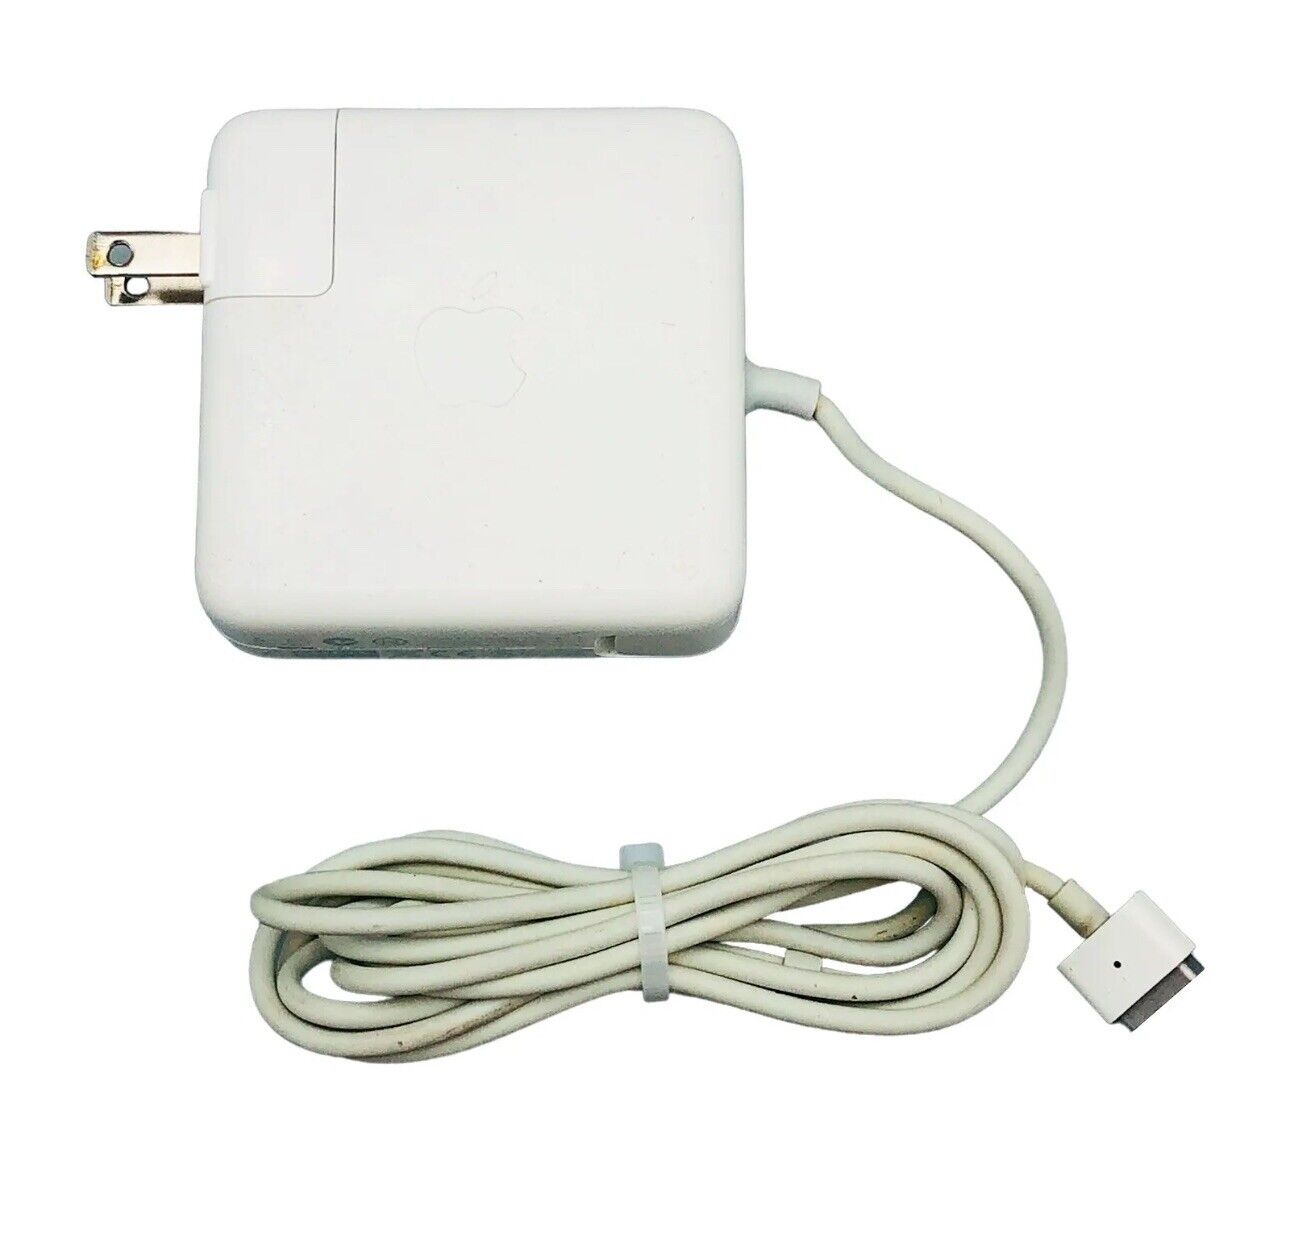 Original Apple MagSafe 60W AC Adapter For Macbook Air 11-inch 13-inch 2008-2011